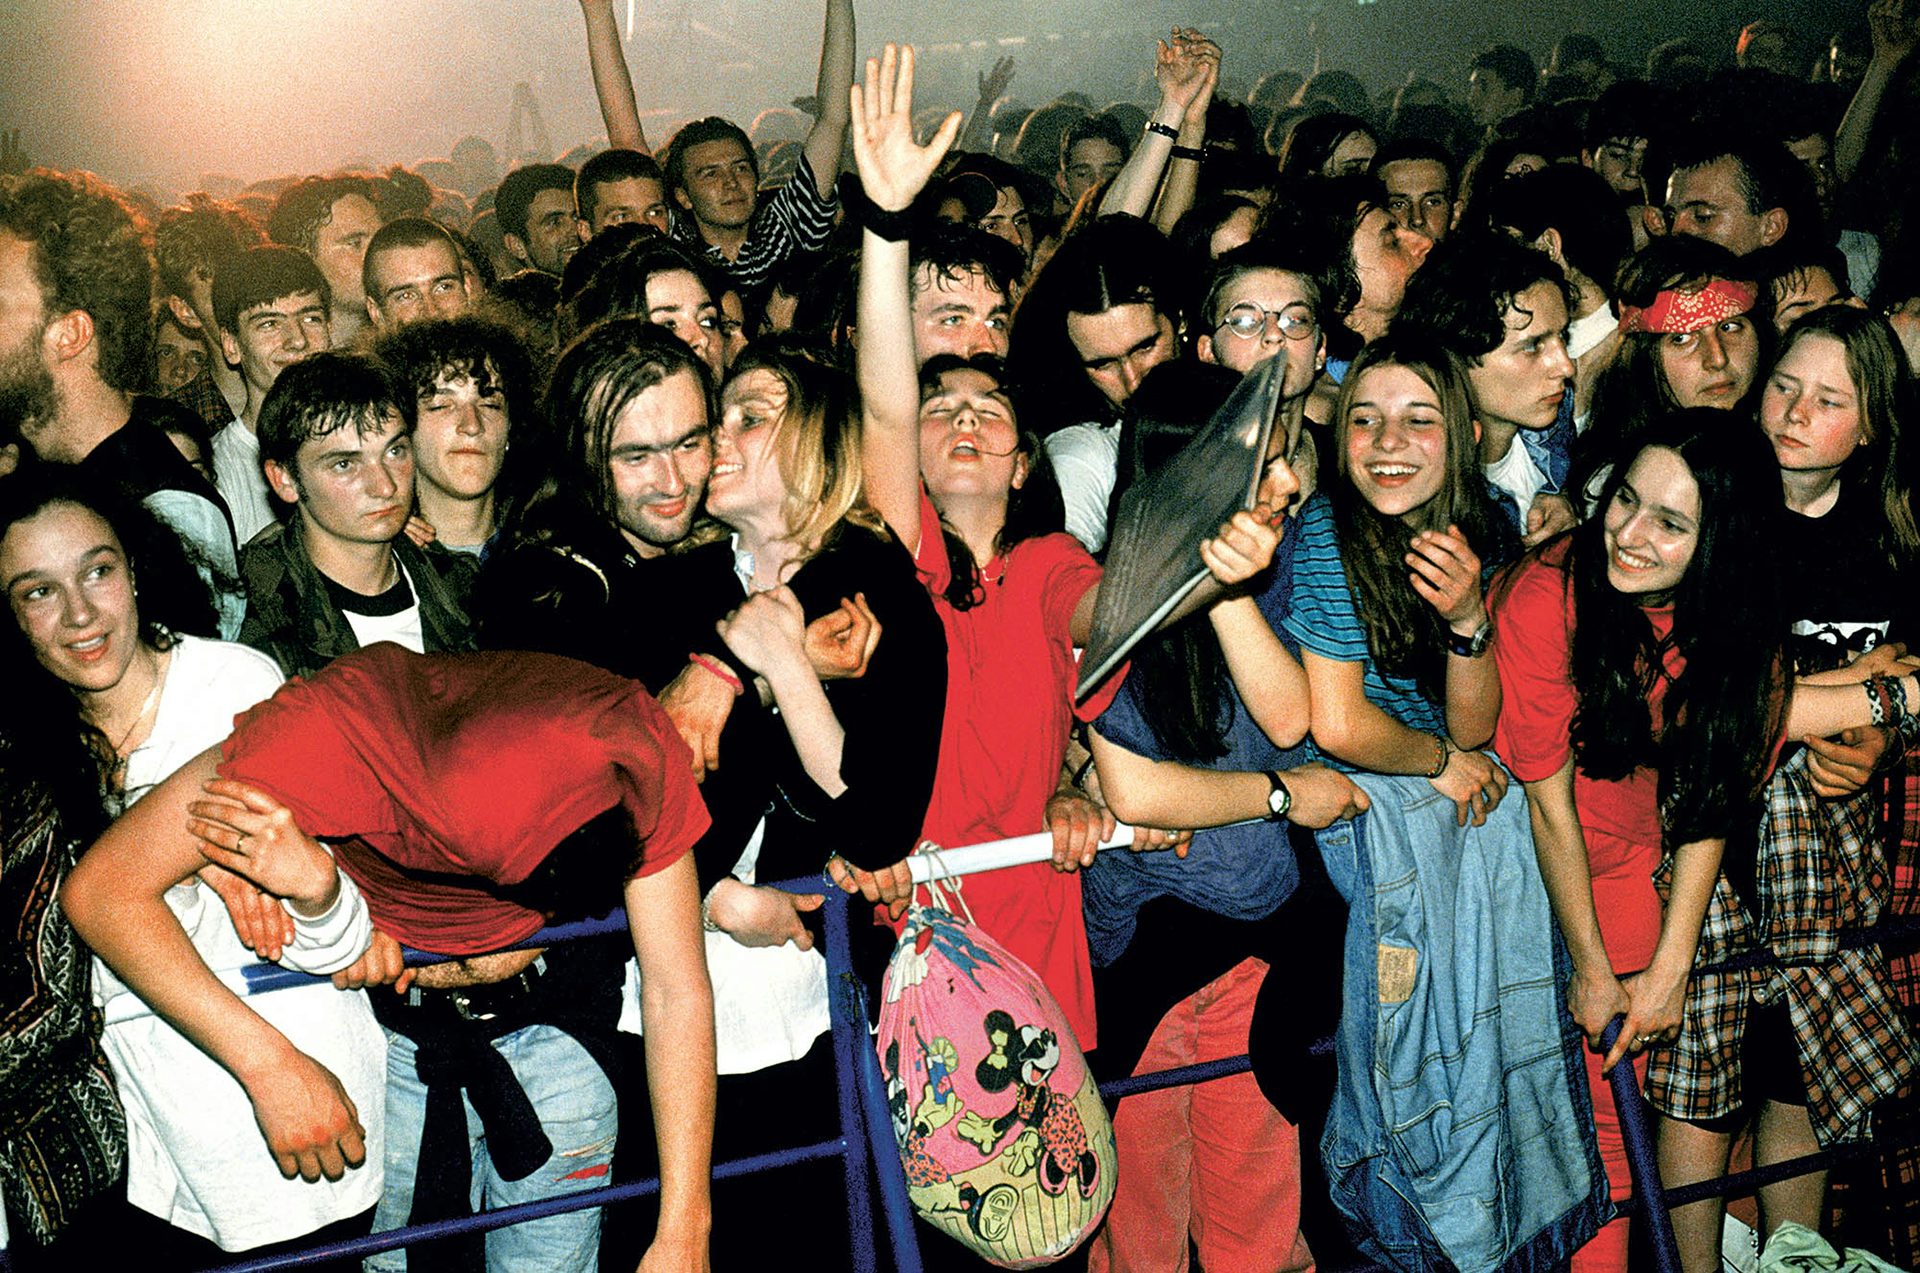 Photograph of young people at a concert from Robin Graubard book Road to Nowhere